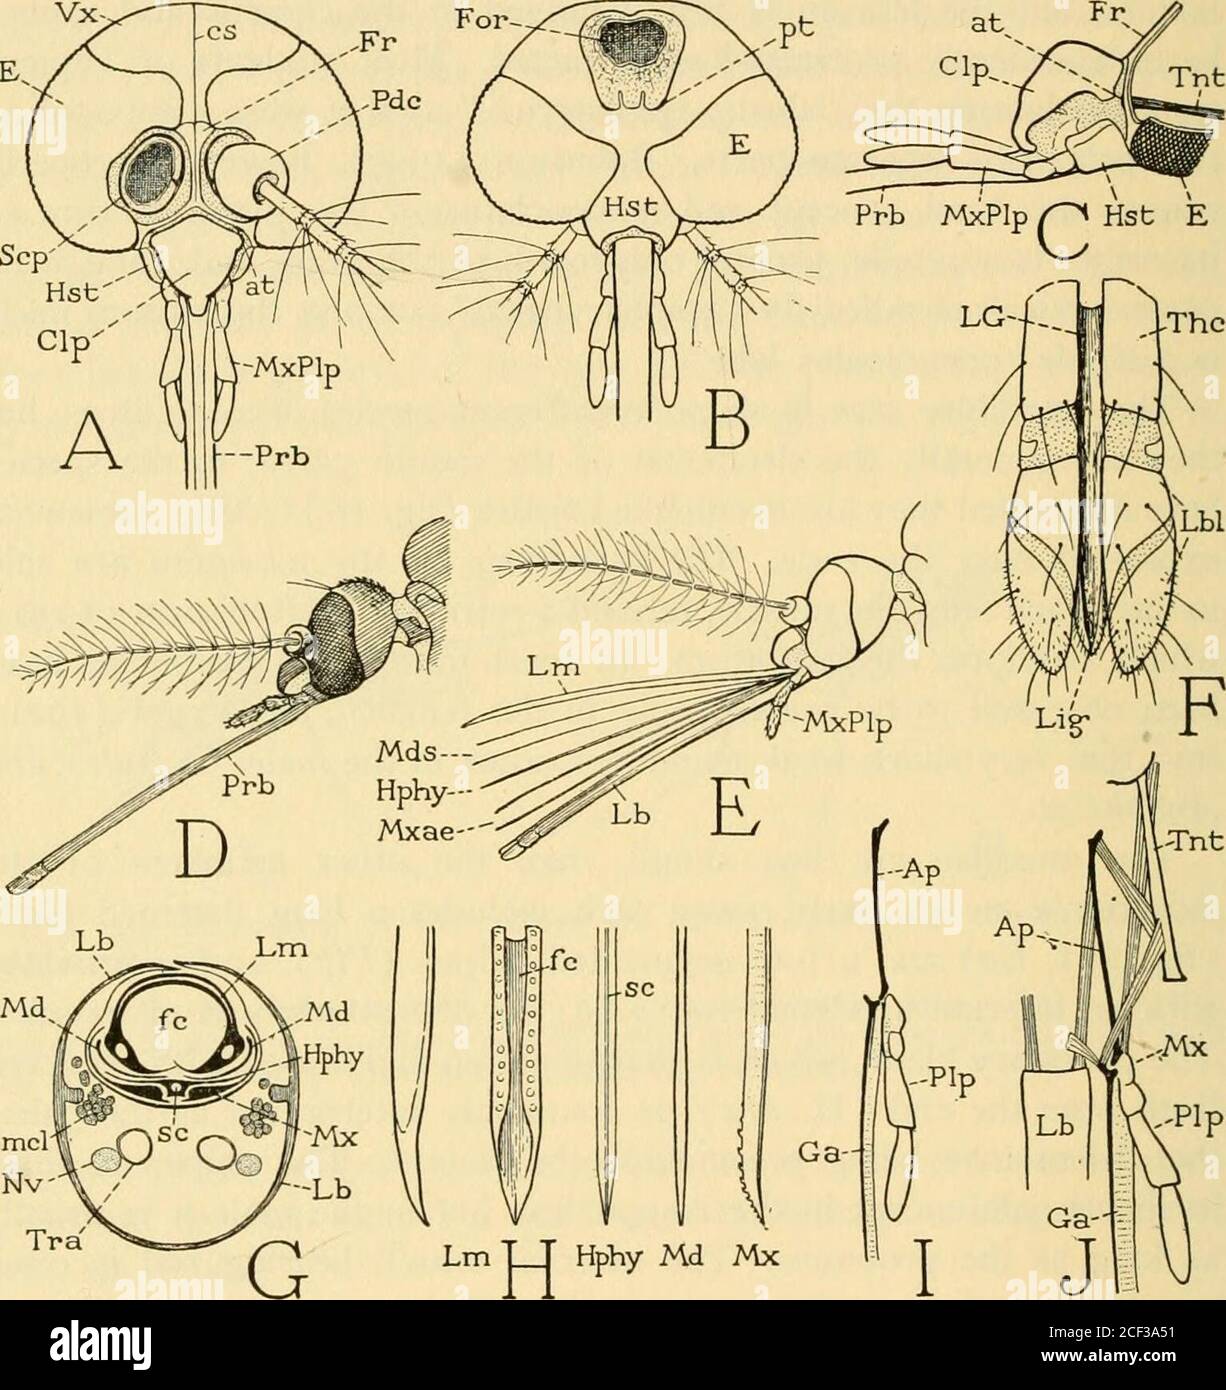 . Smithsonian miscellaneous collections. it is usuallyas long as the proboscis. The internal muscle-bearing rod is oftenregarded as the maxillary stipes, since there are no external partsin the mosquito representing the basal plates of the maxillae. Therod is of an apodemal nature, however, and no evidence has beengiven of its supposed stipital derivation. The maxilla is providedwith protractor and retractor muscles (J), the protractors beinginserted on the end of the apodeme, the retractors on the base of thegalea and palpus. The maxillary blades, therefore, are the onlystylets that are freel Stock Photo